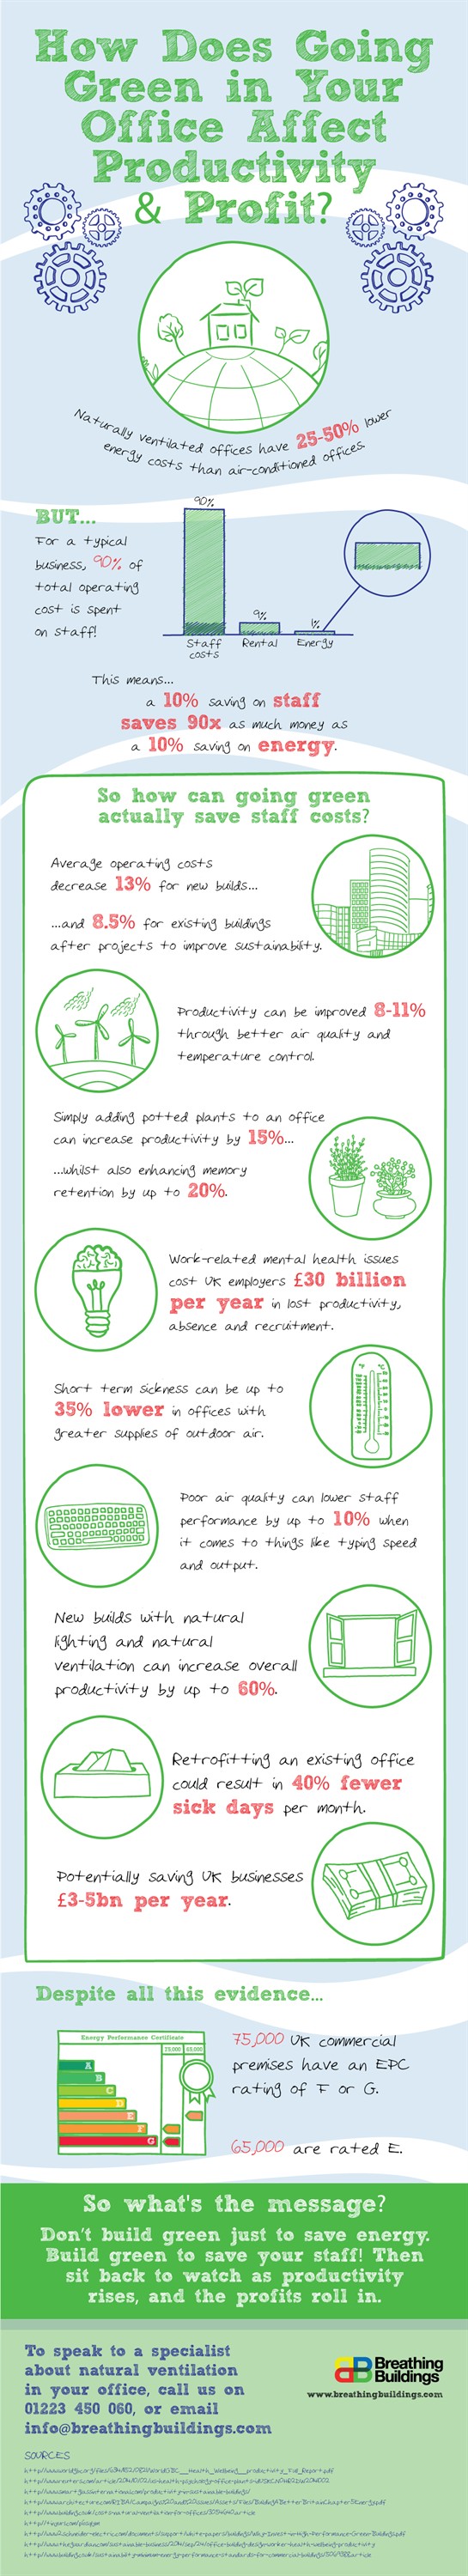 breathing-buildings - how going green in your office can affect productivity and profit_545x3000